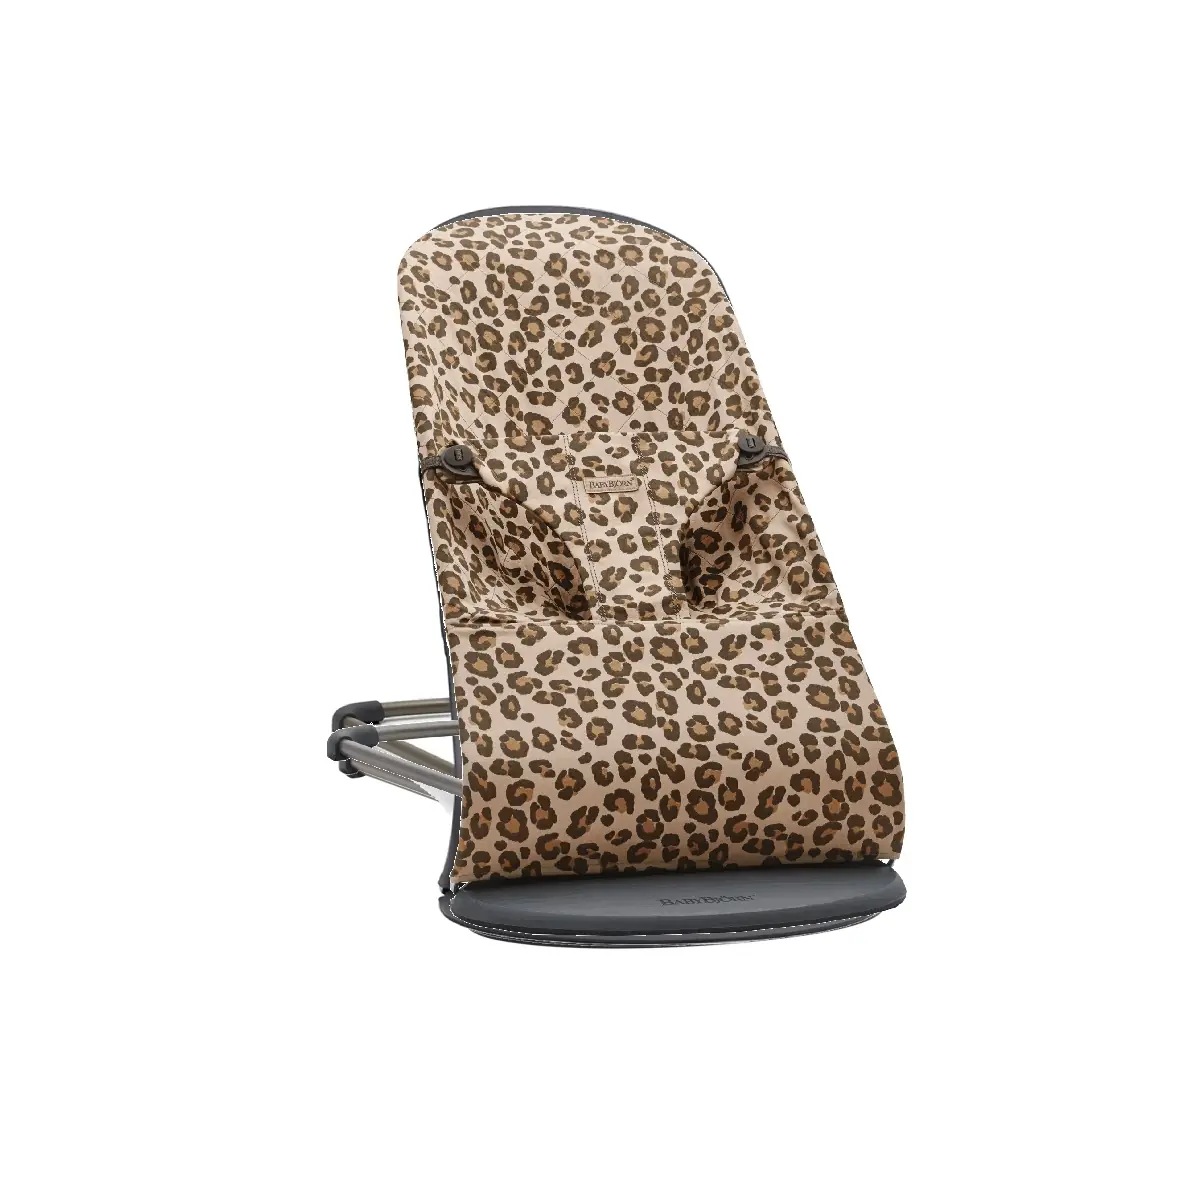 Image of BABYBJÖRN Bliss Cotton Quilt Bouncer-Leopard Print